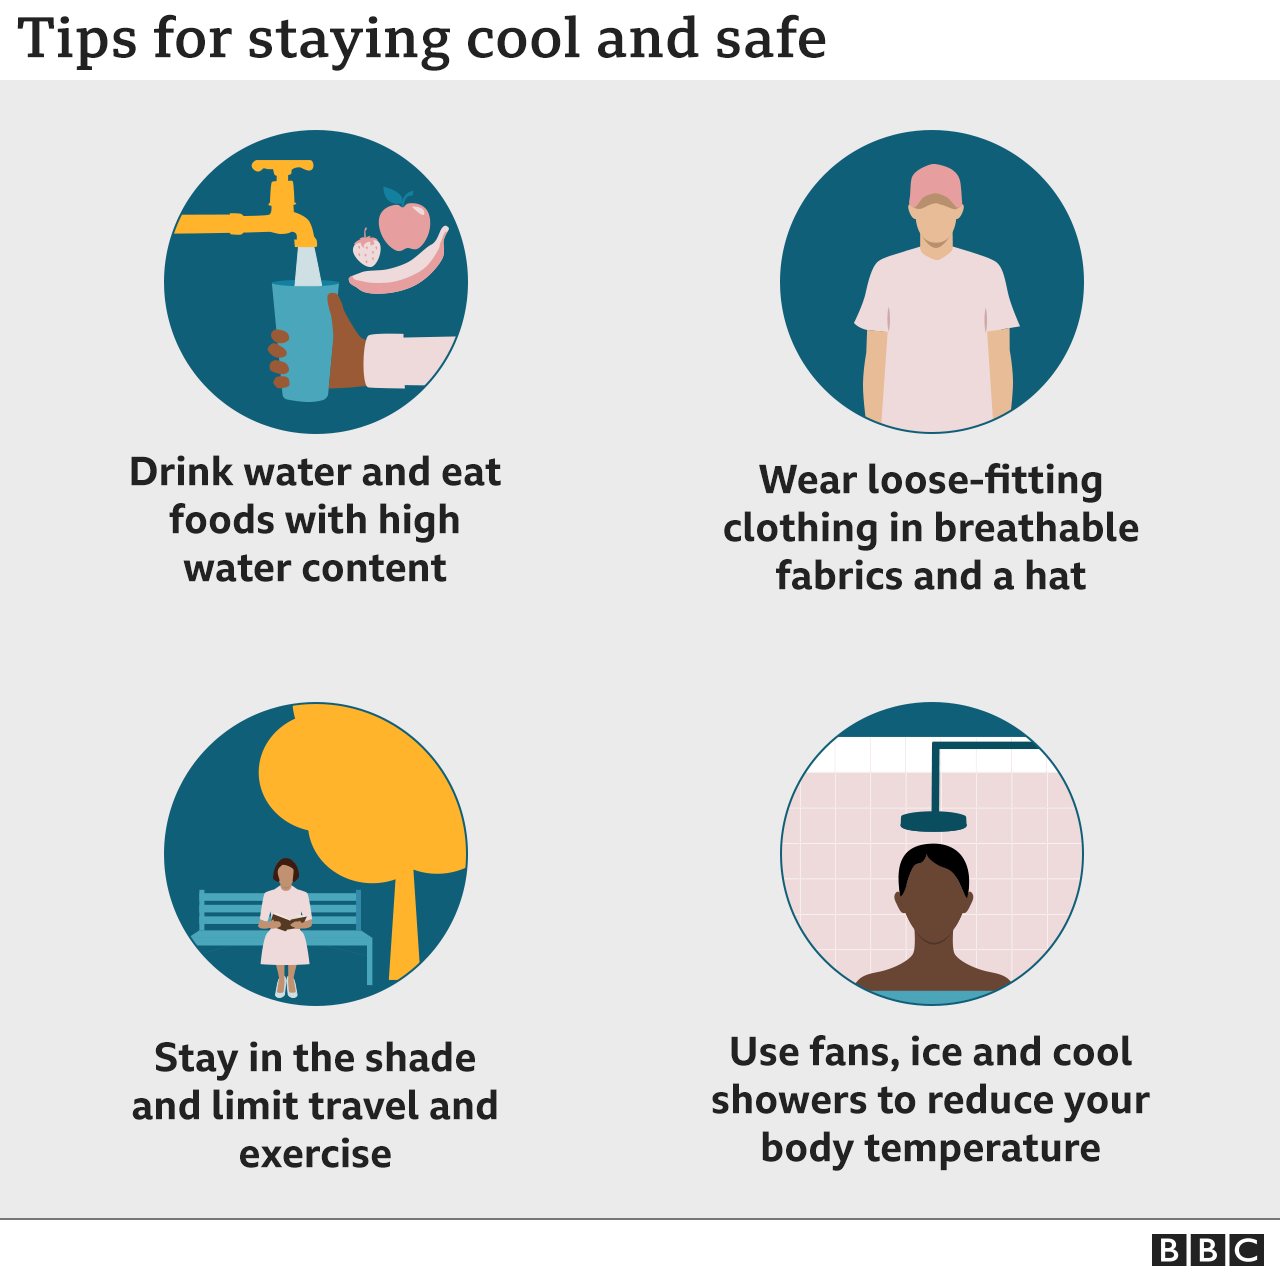 Tips for staying cool: Drink water and eat foods with high water content; Wear loose-fitting clothing in breathable fabrics and a hat. Stay in the shade and limit travel and exercise; use fans, ice and cool showers to reduce body temperature